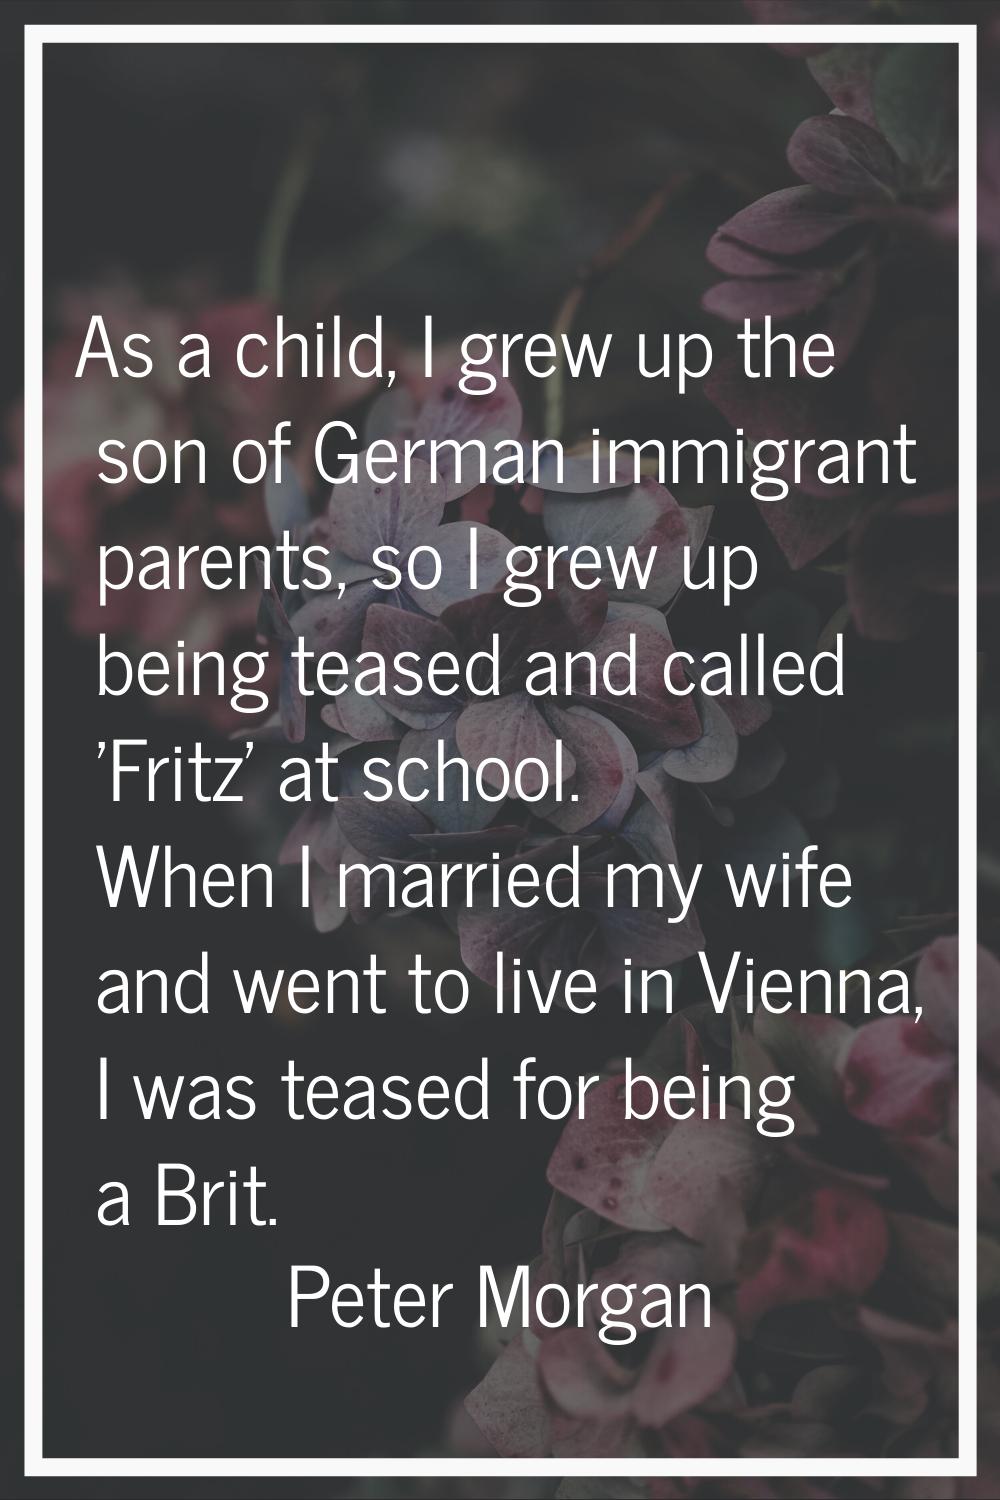 As a child, I grew up the son of German immigrant parents, so I grew up being teased and called 'Fr